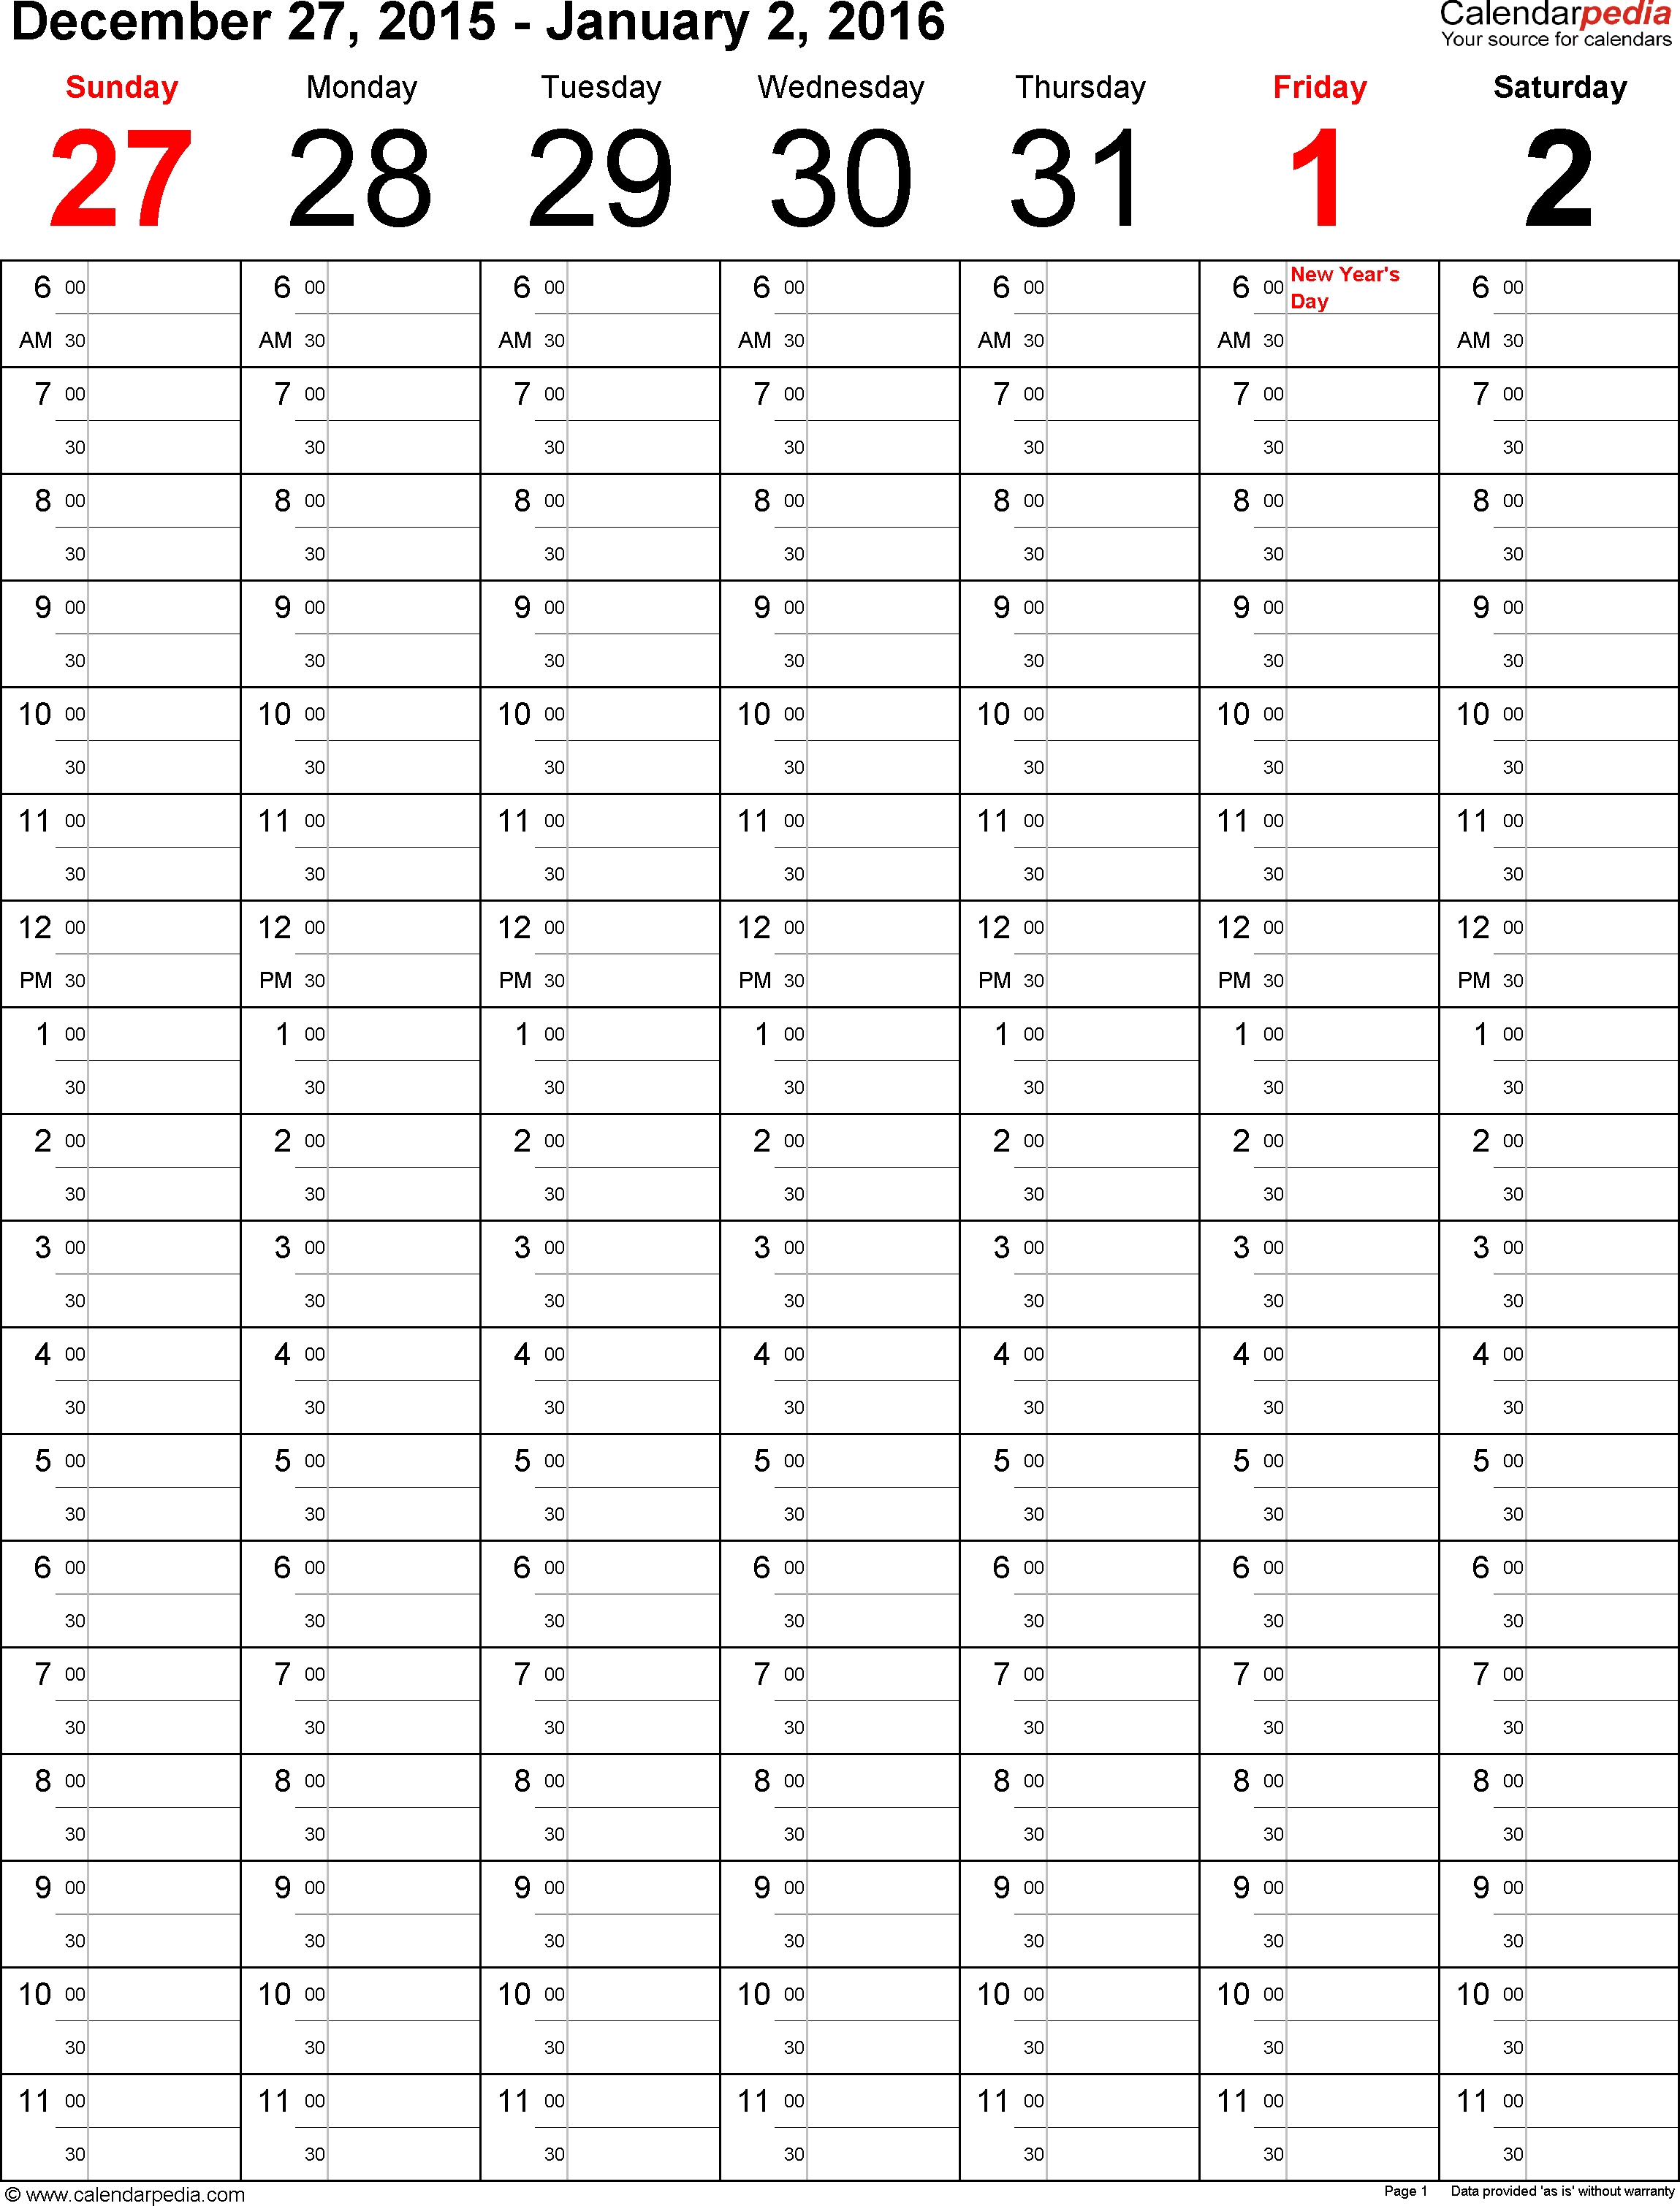 Weekly Calendars 2016 For Word - 12 Free Printable Templates